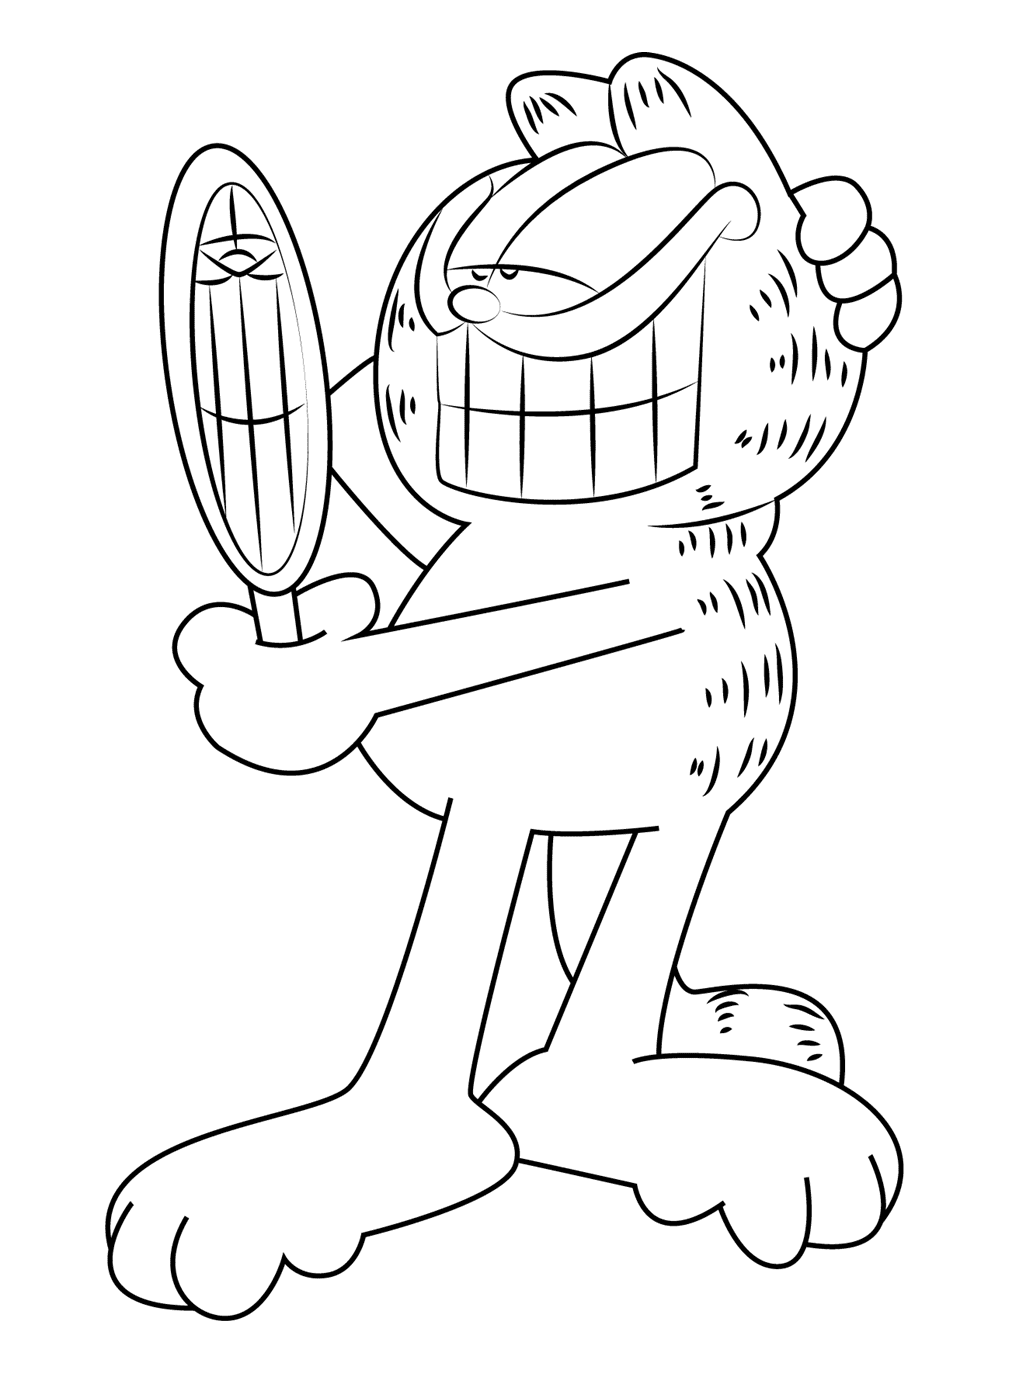 Garfield see in Mirror Coloring Pages